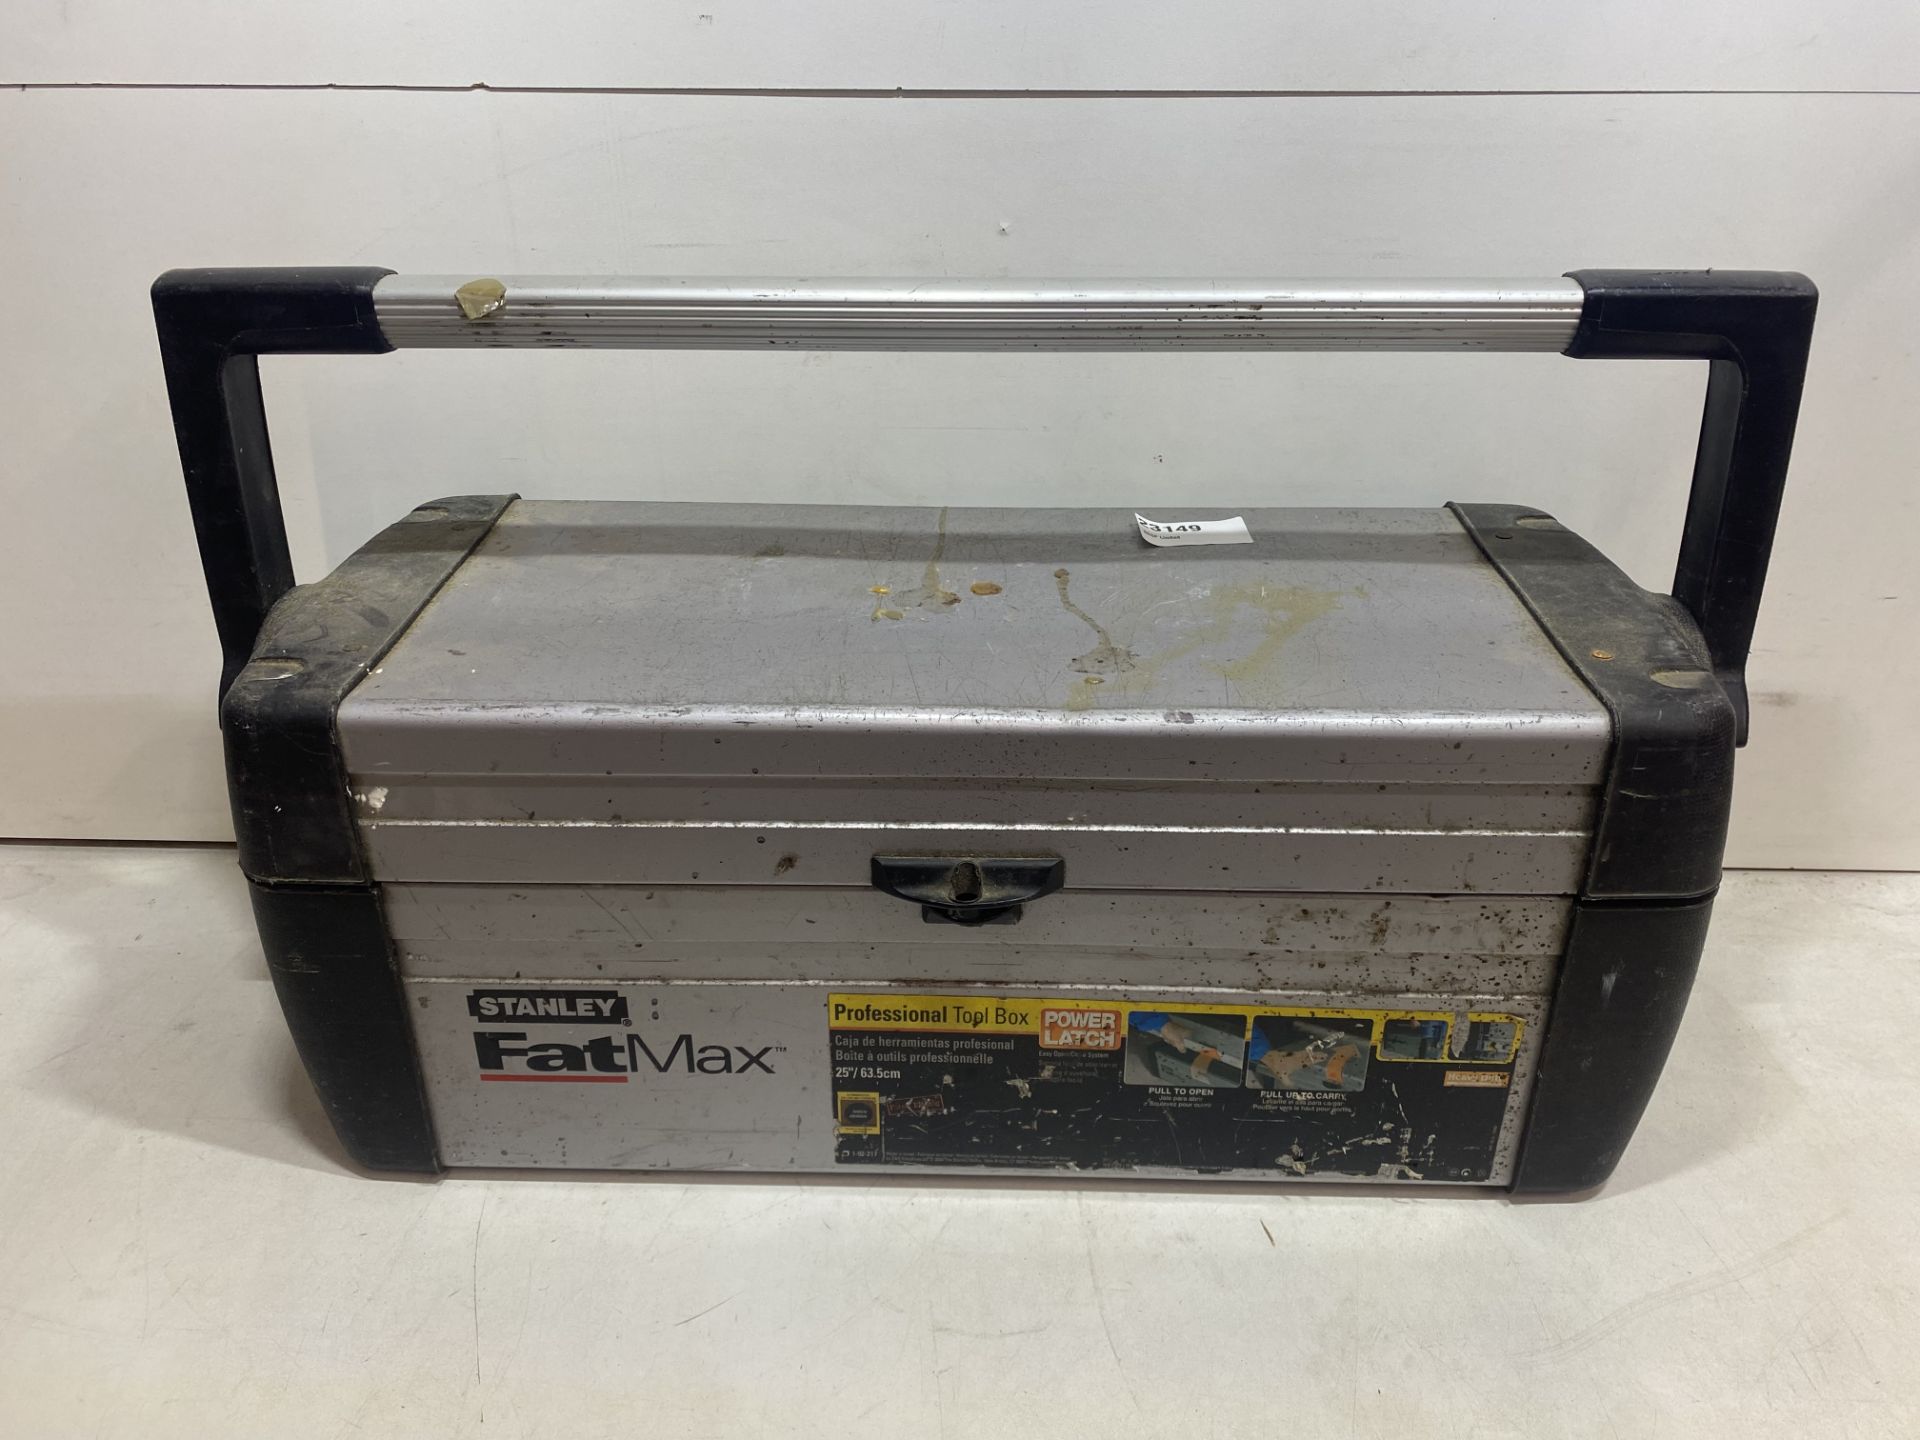 2 x Stanley Fat Max Tool Boxes As Seen In Photos - Image 2 of 9